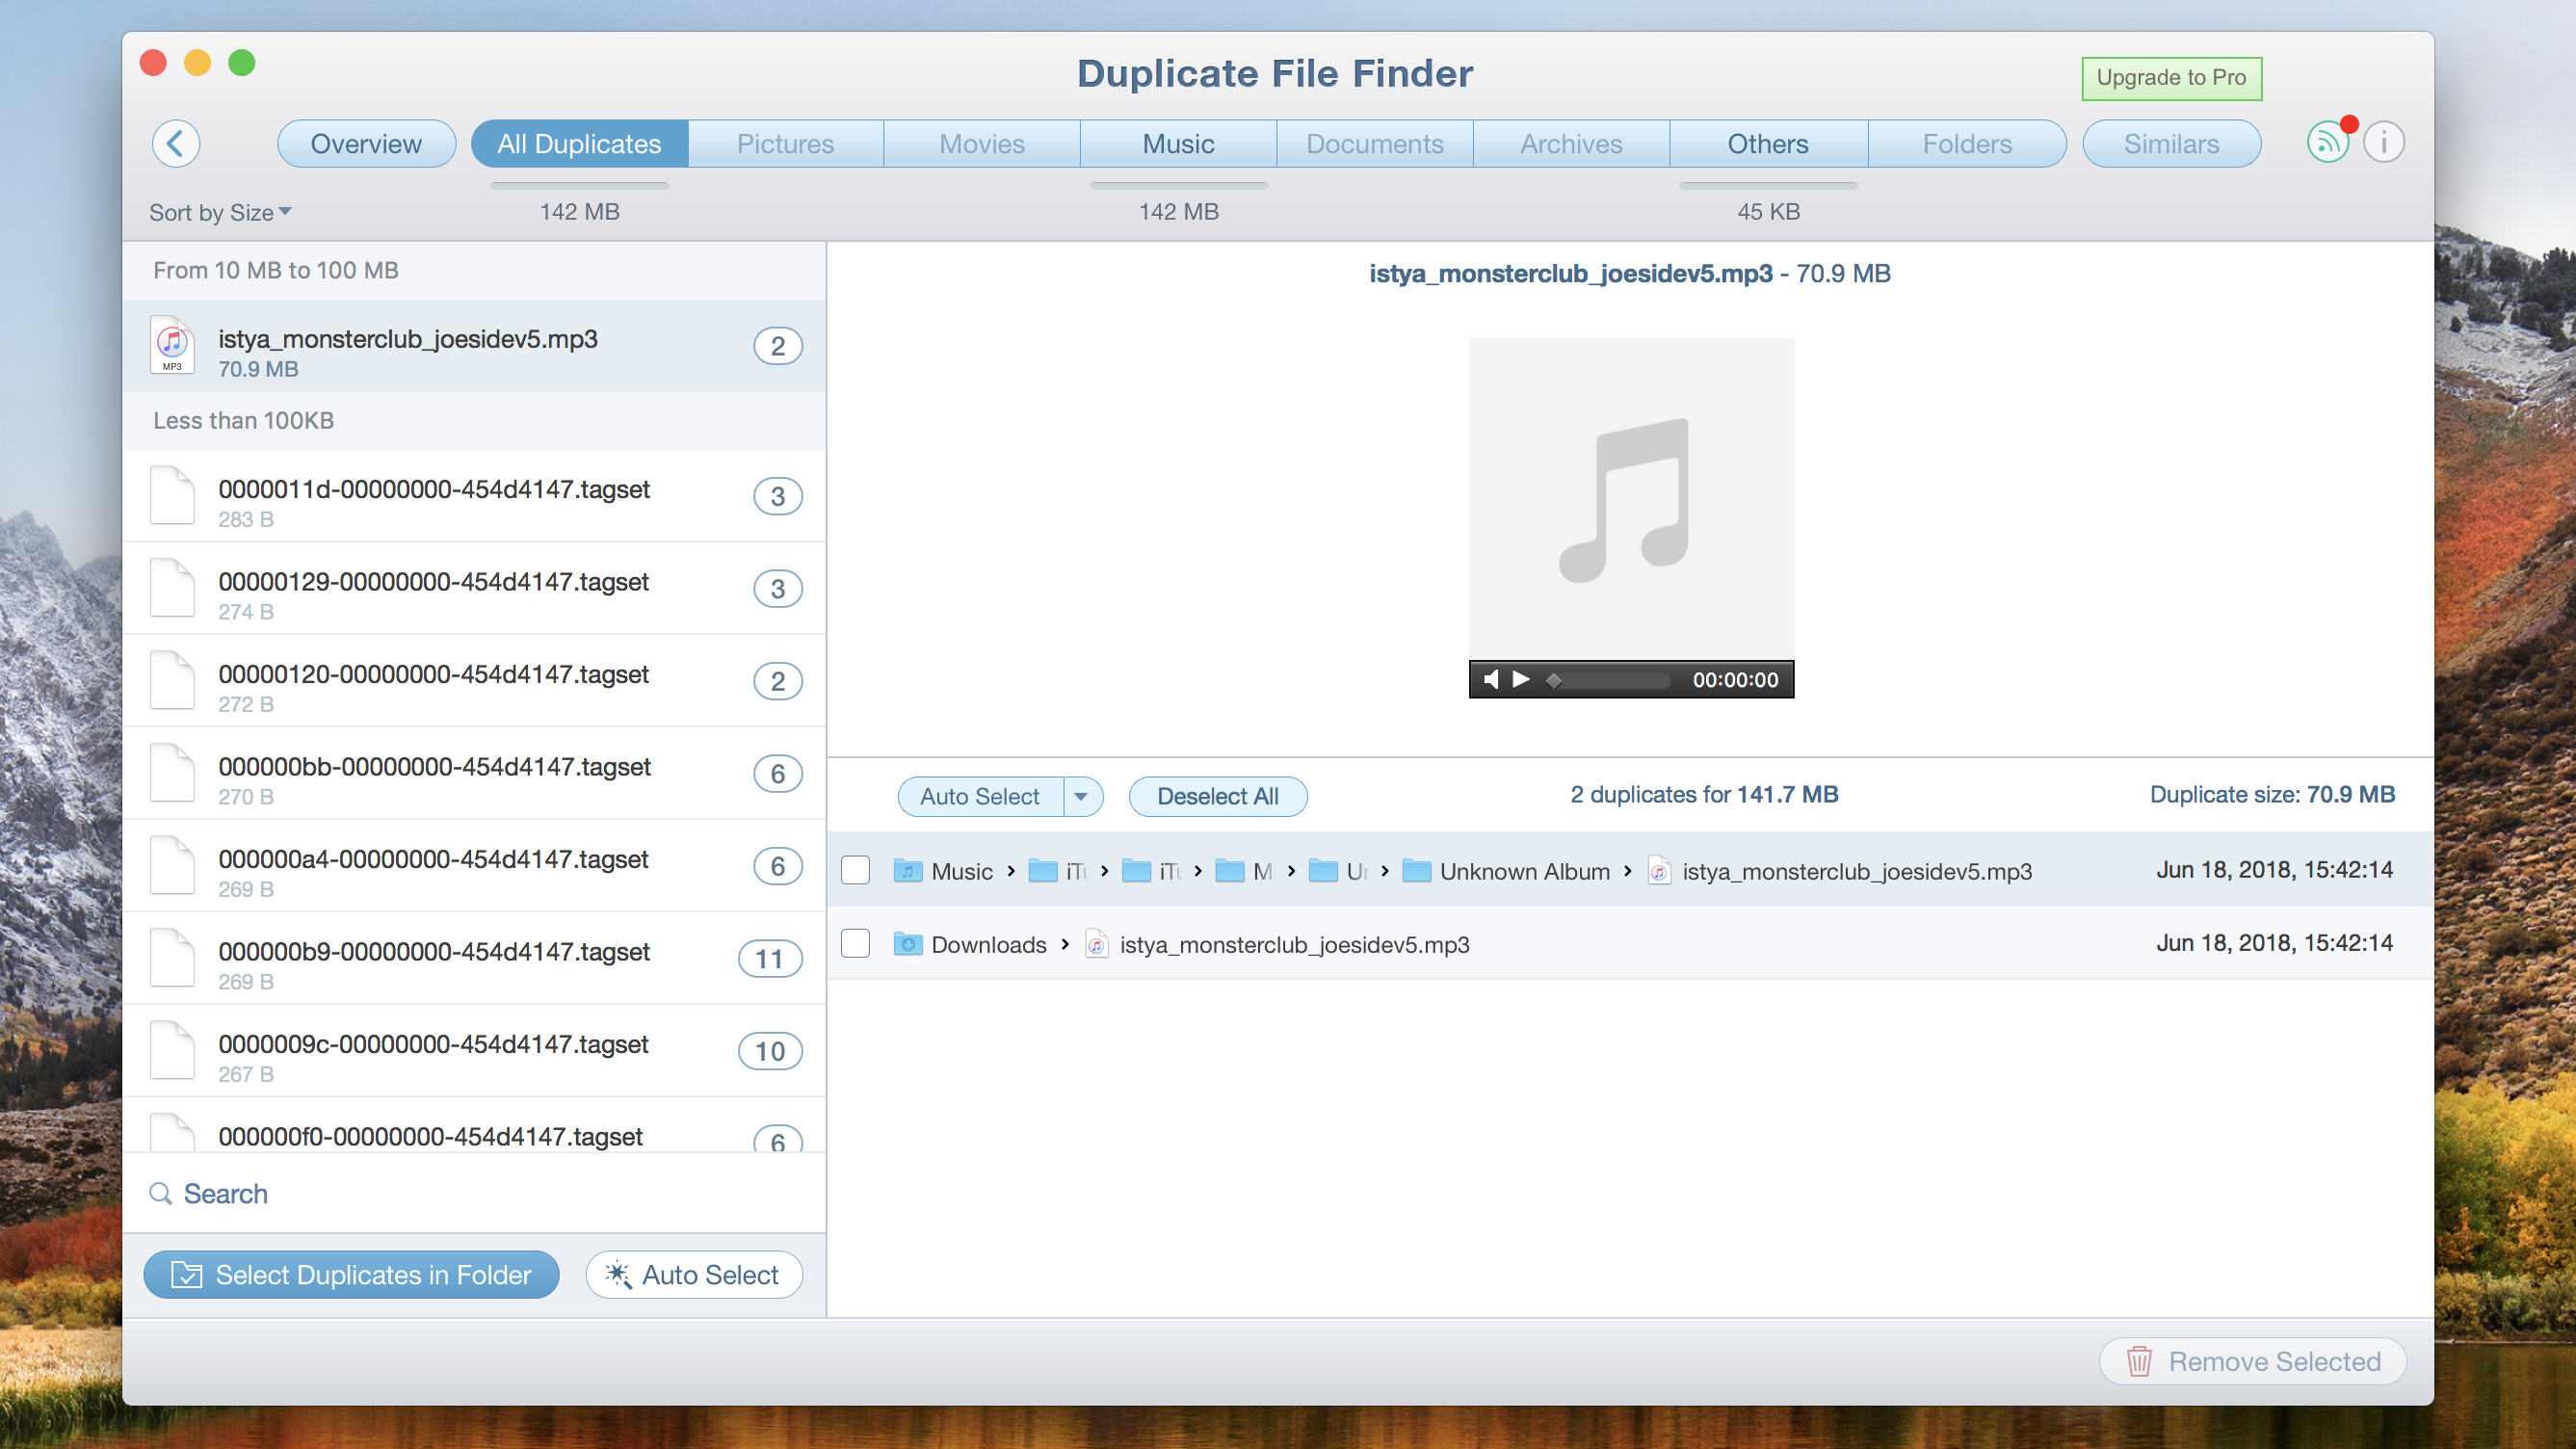 Best Software For Finding Duplicate Files On Mac